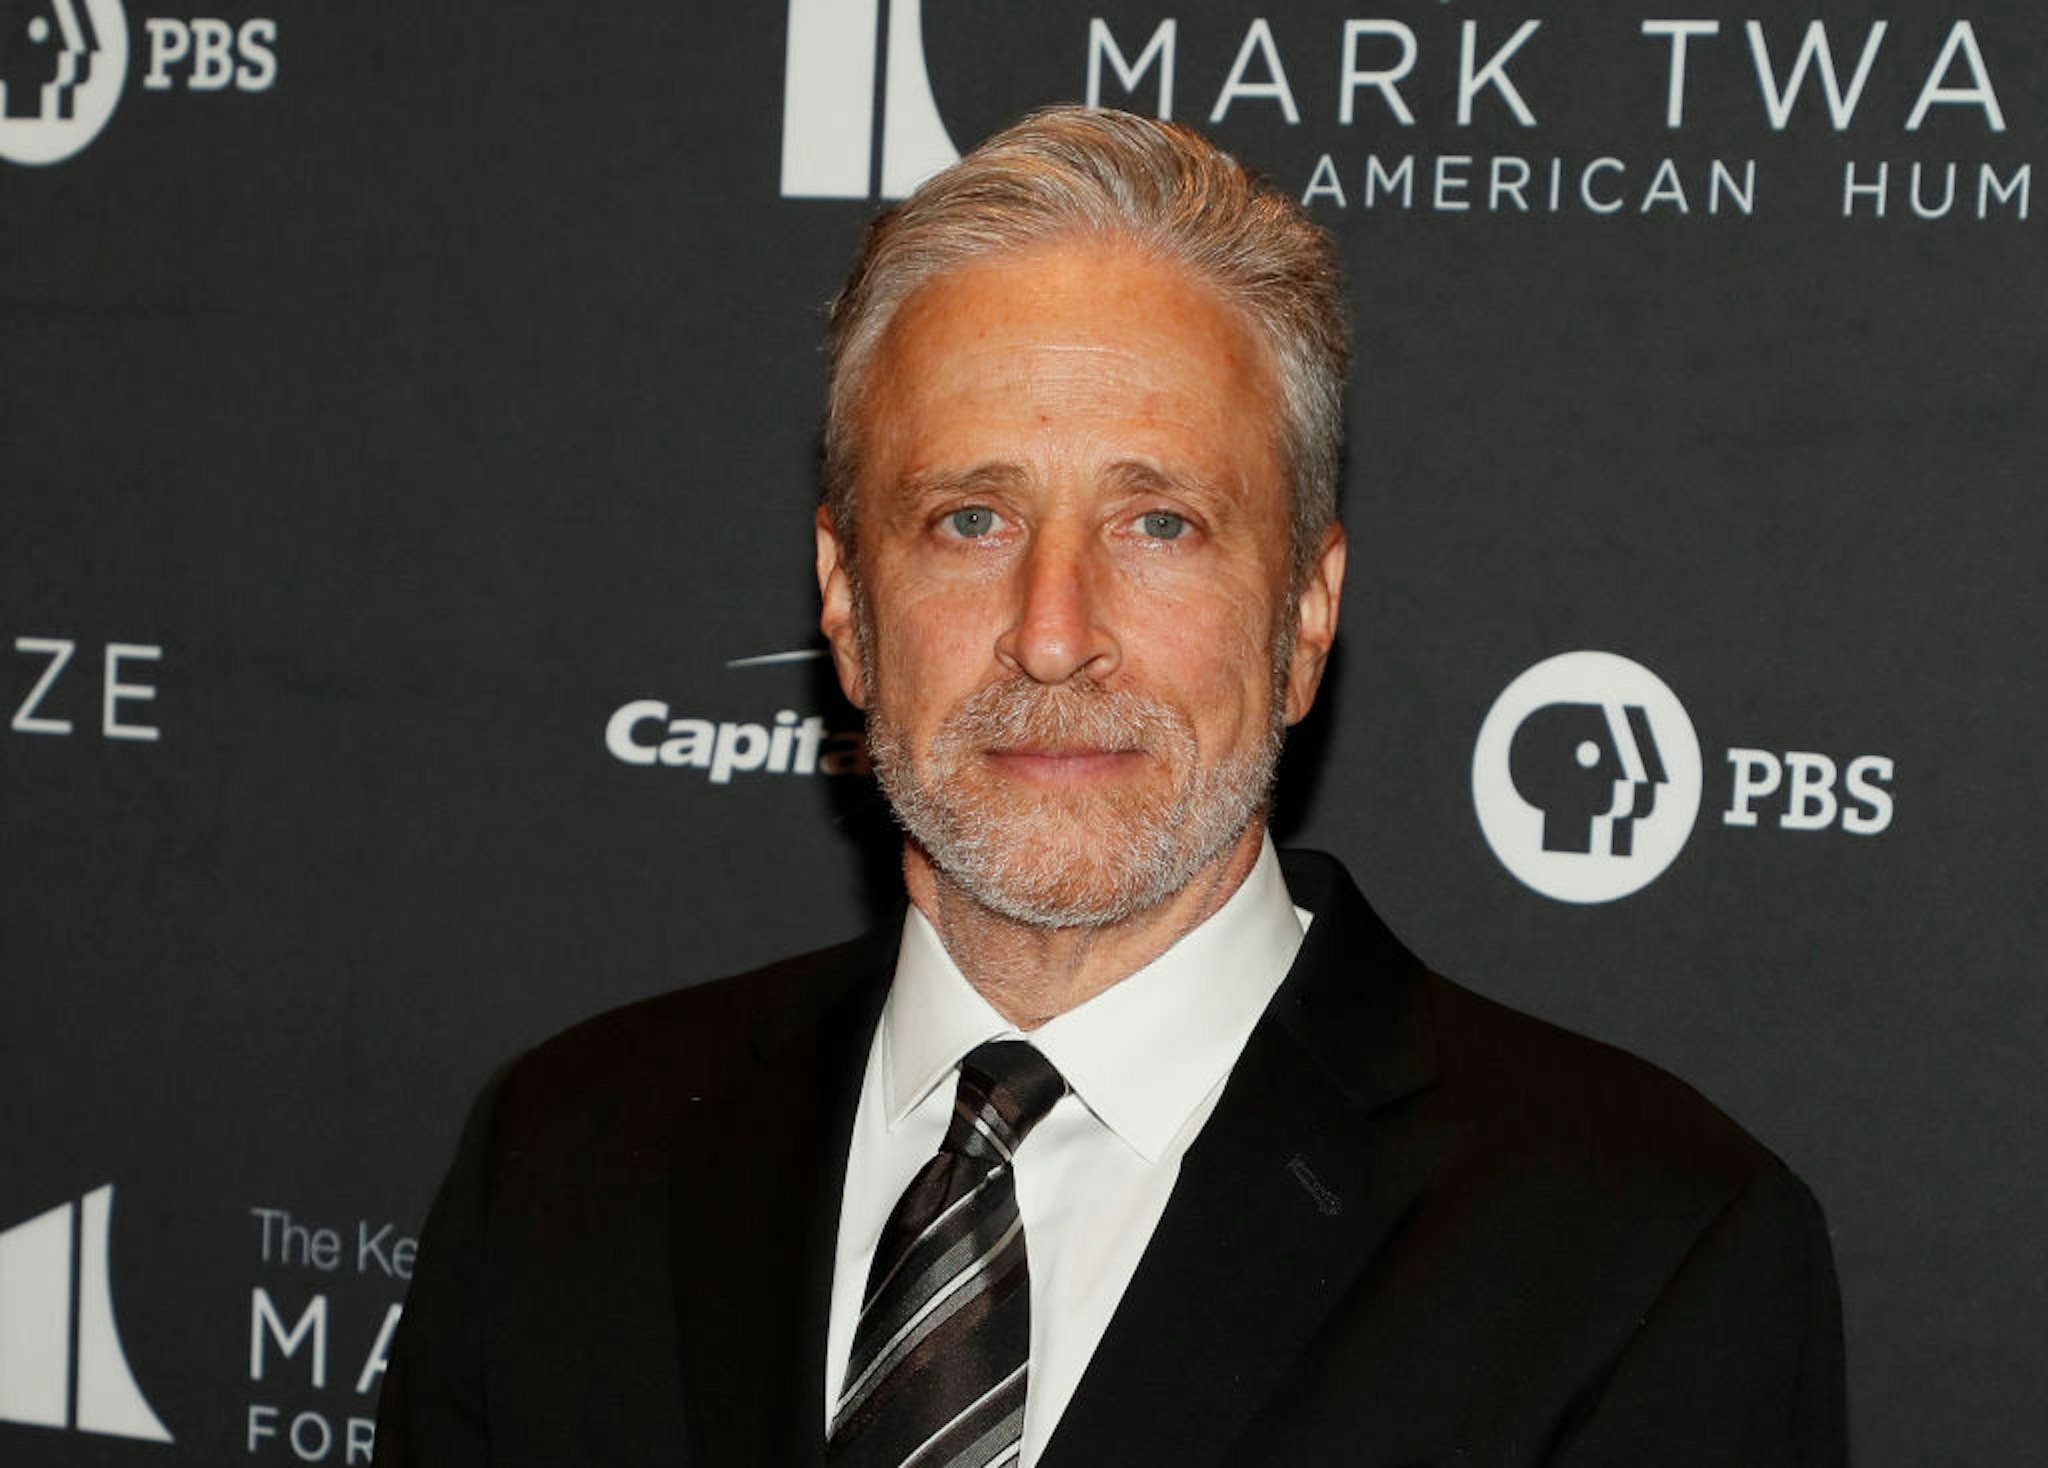 WASHINGTON, DC - APRIL 24: Jon Stewart attends the 23rd Annual Mark Twain Prize For American Humor at The Kennedy Center on April 24, 2022 in Washington, DC. (Photo by Paul Morigi/Getty Images)